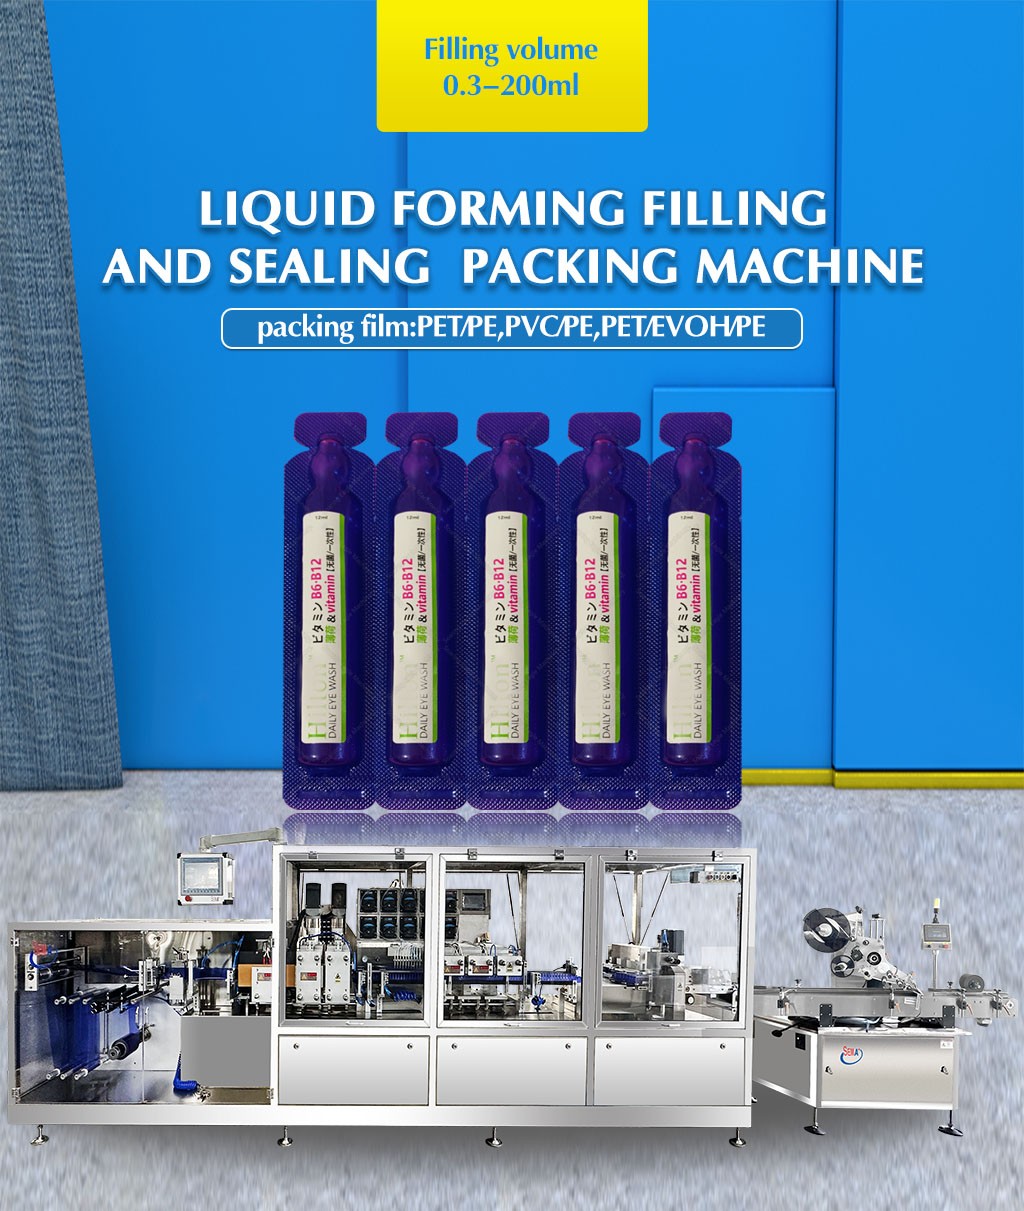 Liquid filling machine that could pack pharmaceutical